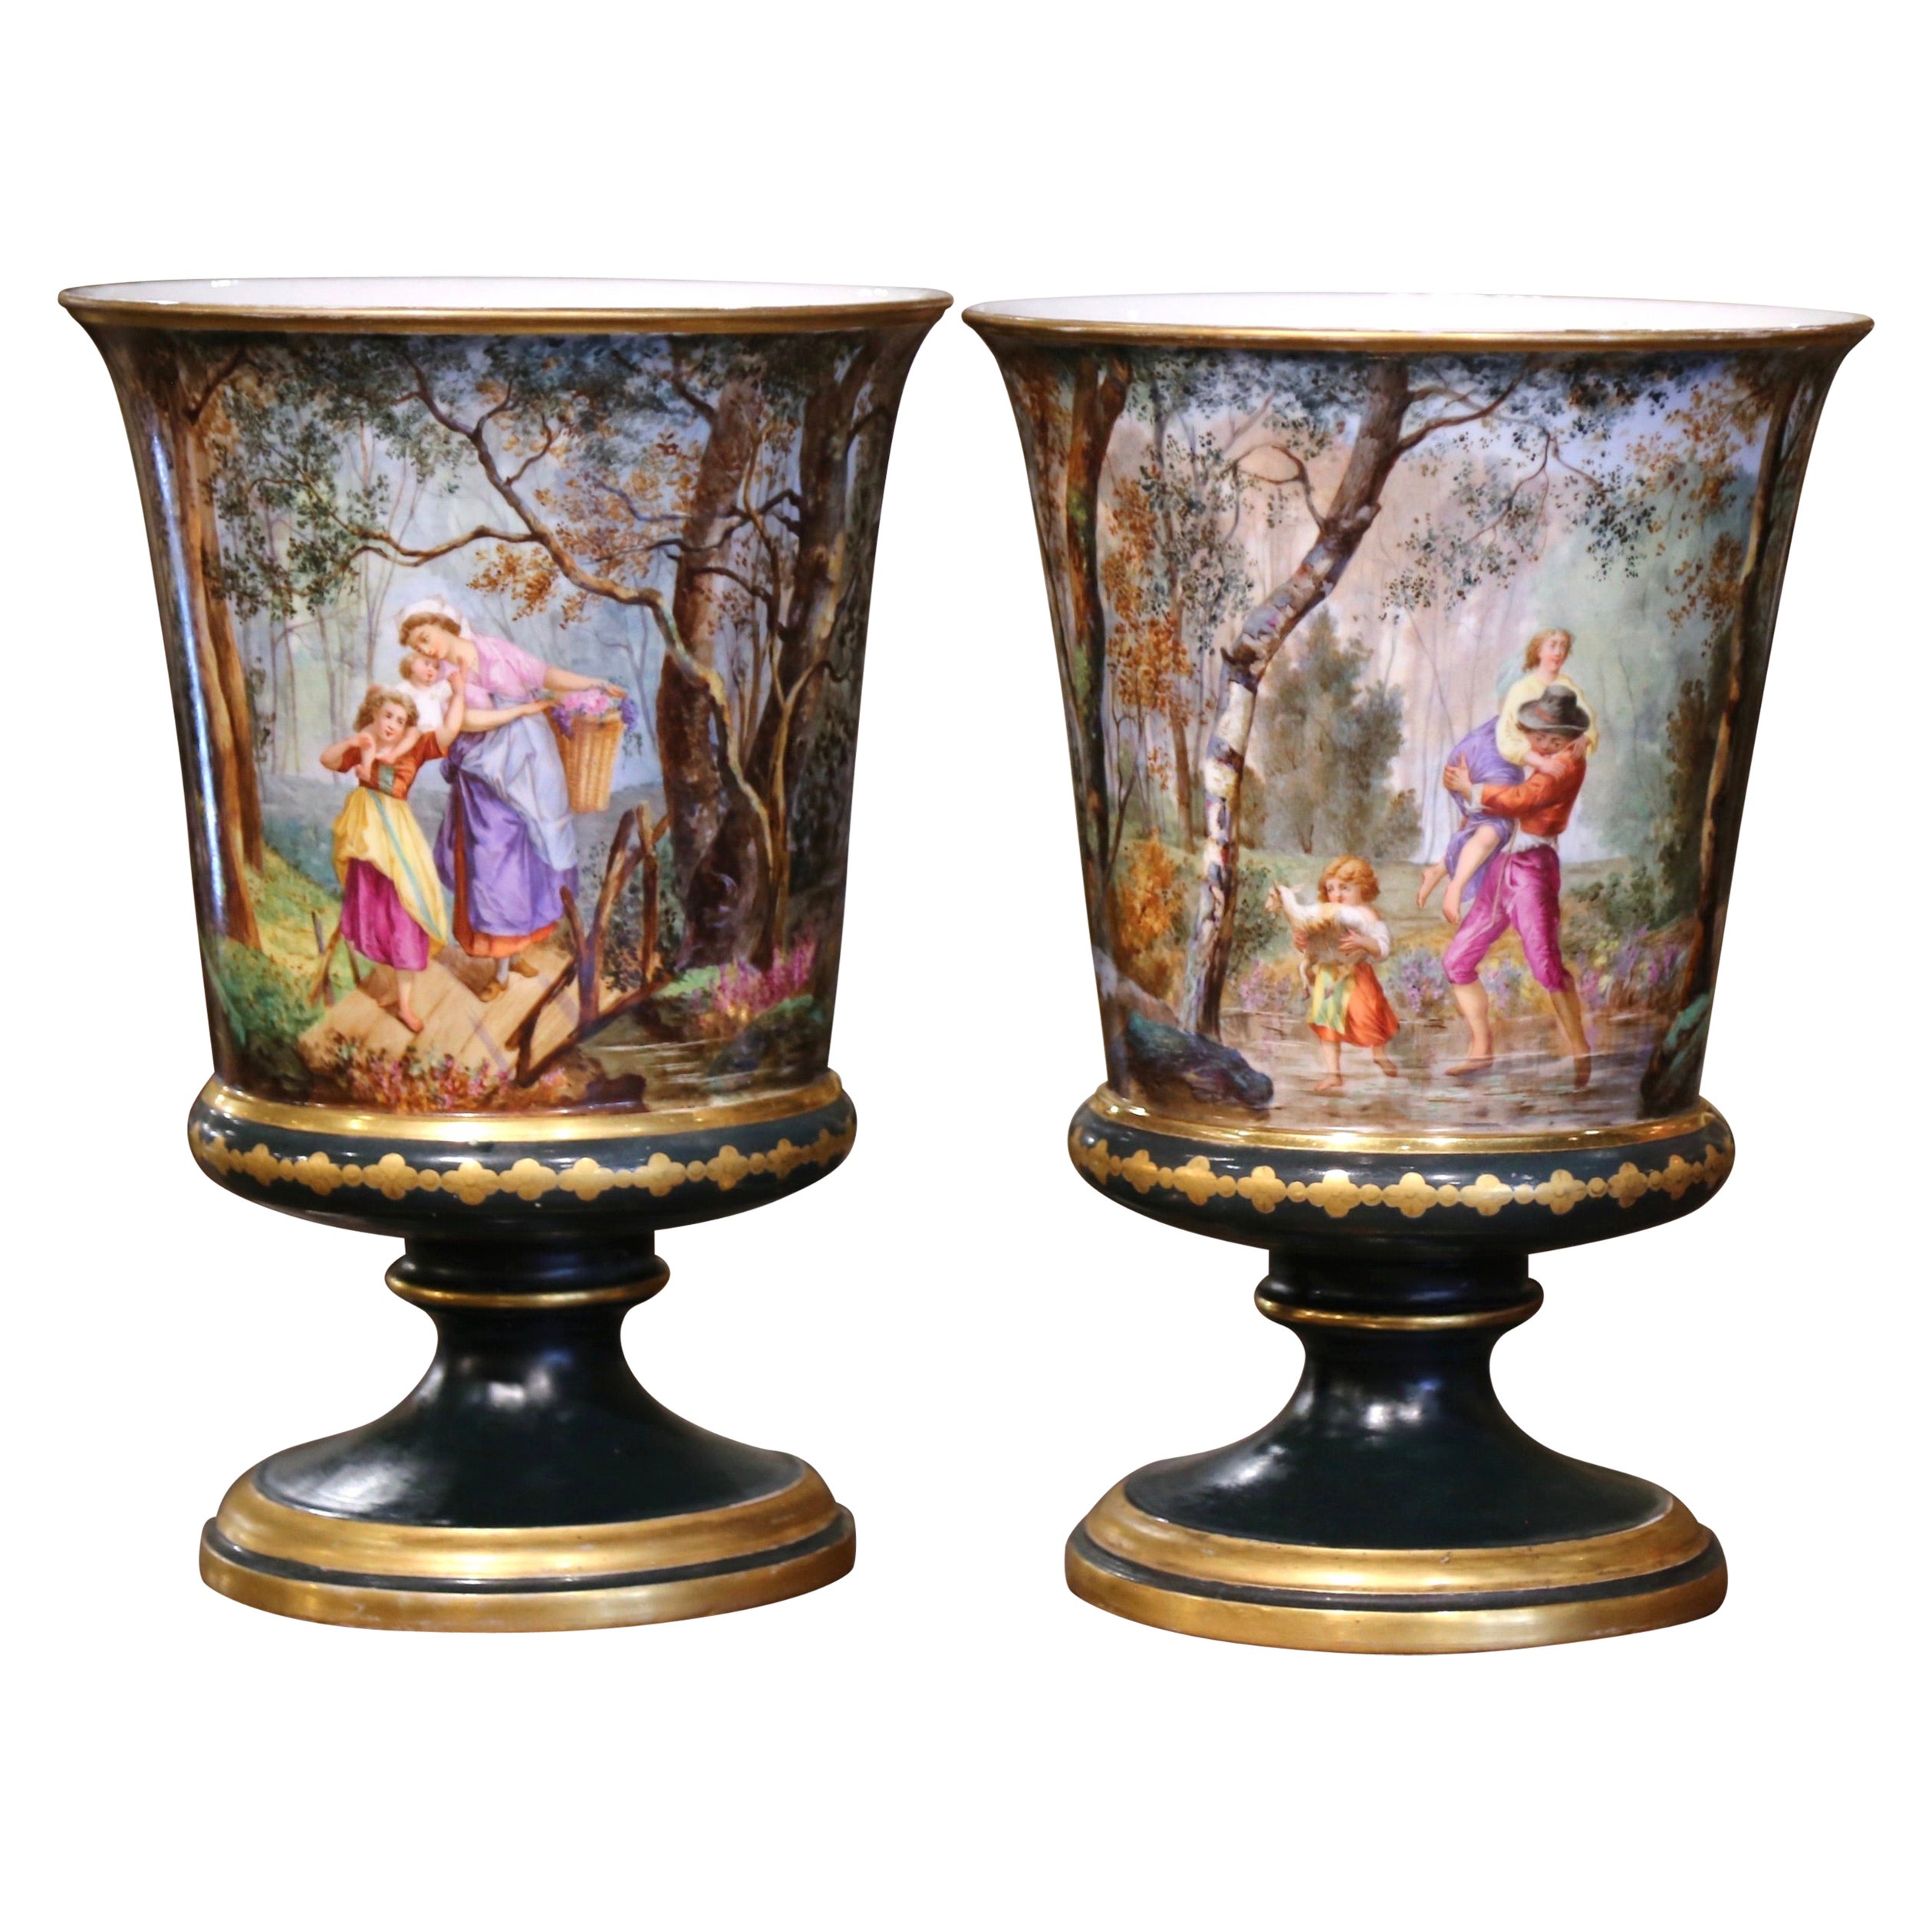 Pair of 19th Century French Neoclassical Painted & Gilt Enameled Porcelain Vases For Sale